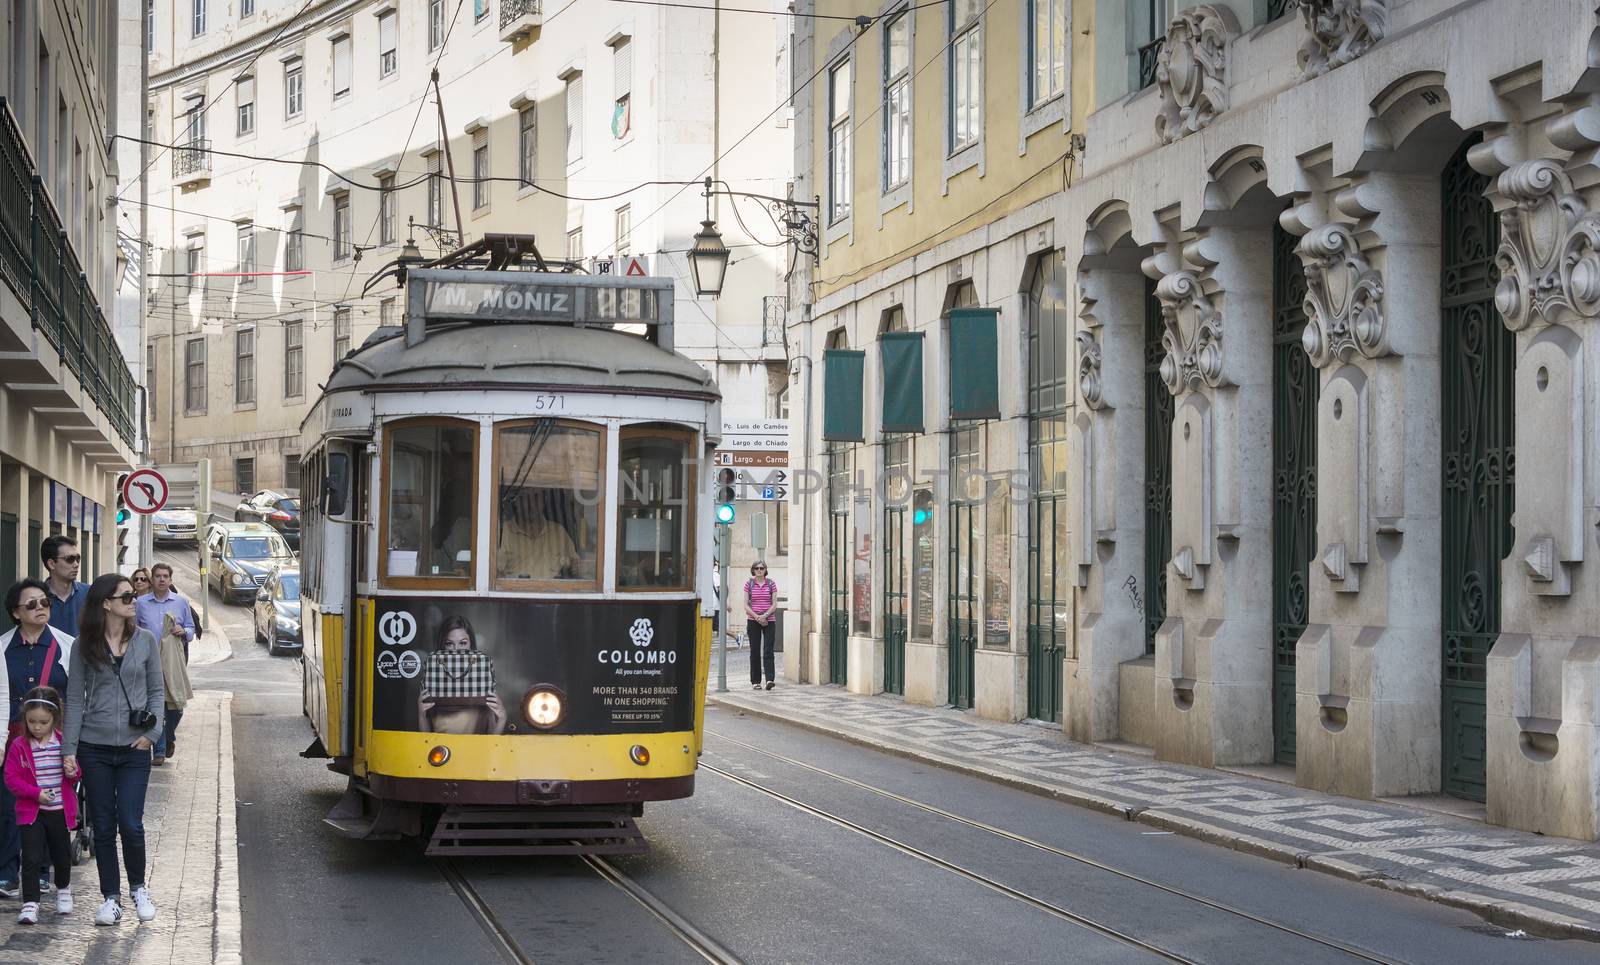 famous tram in lissabon by compuinfoto